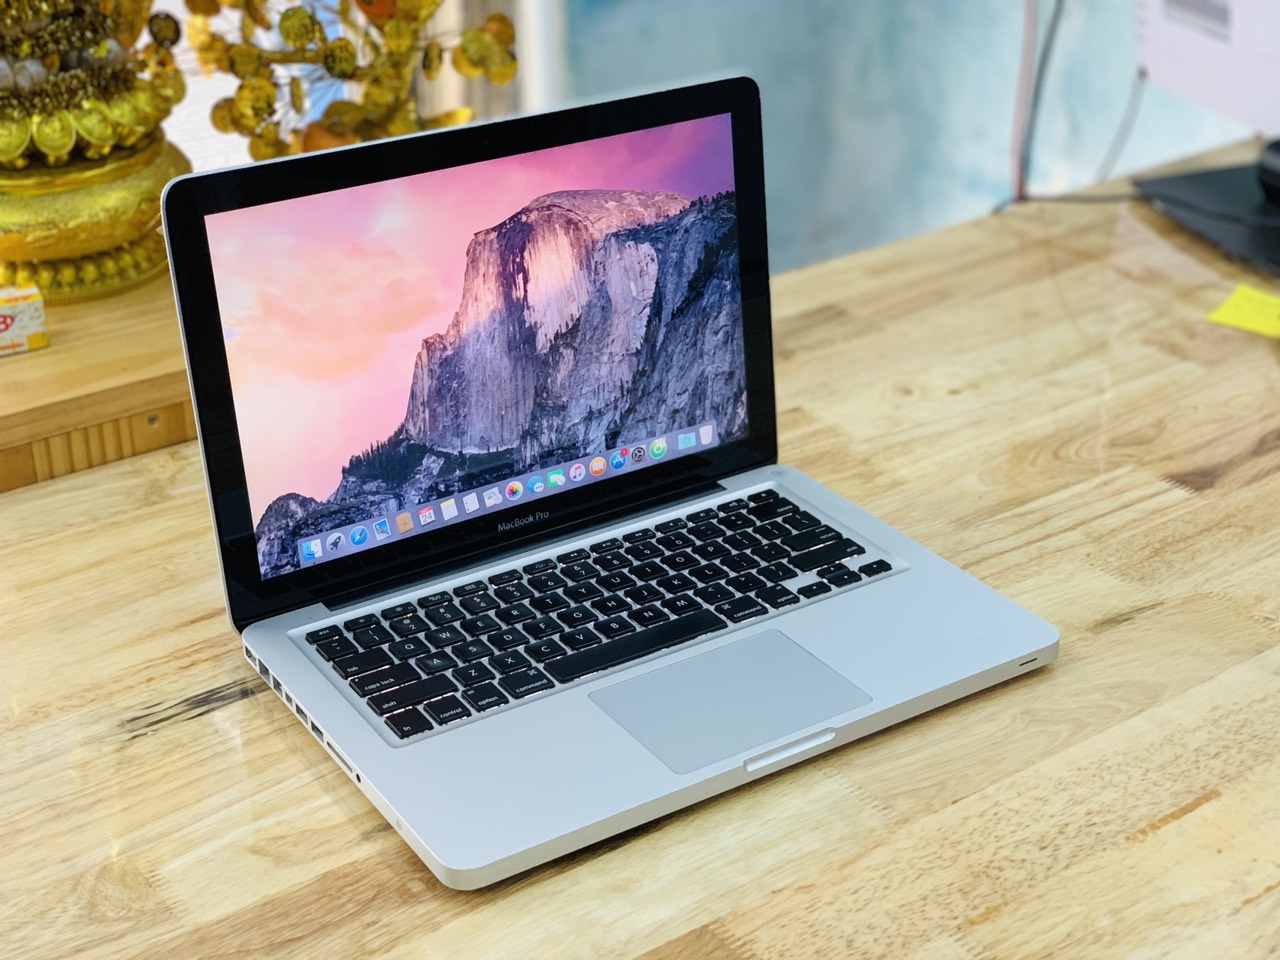 8gb ram and 16gb ram macbook pro difference